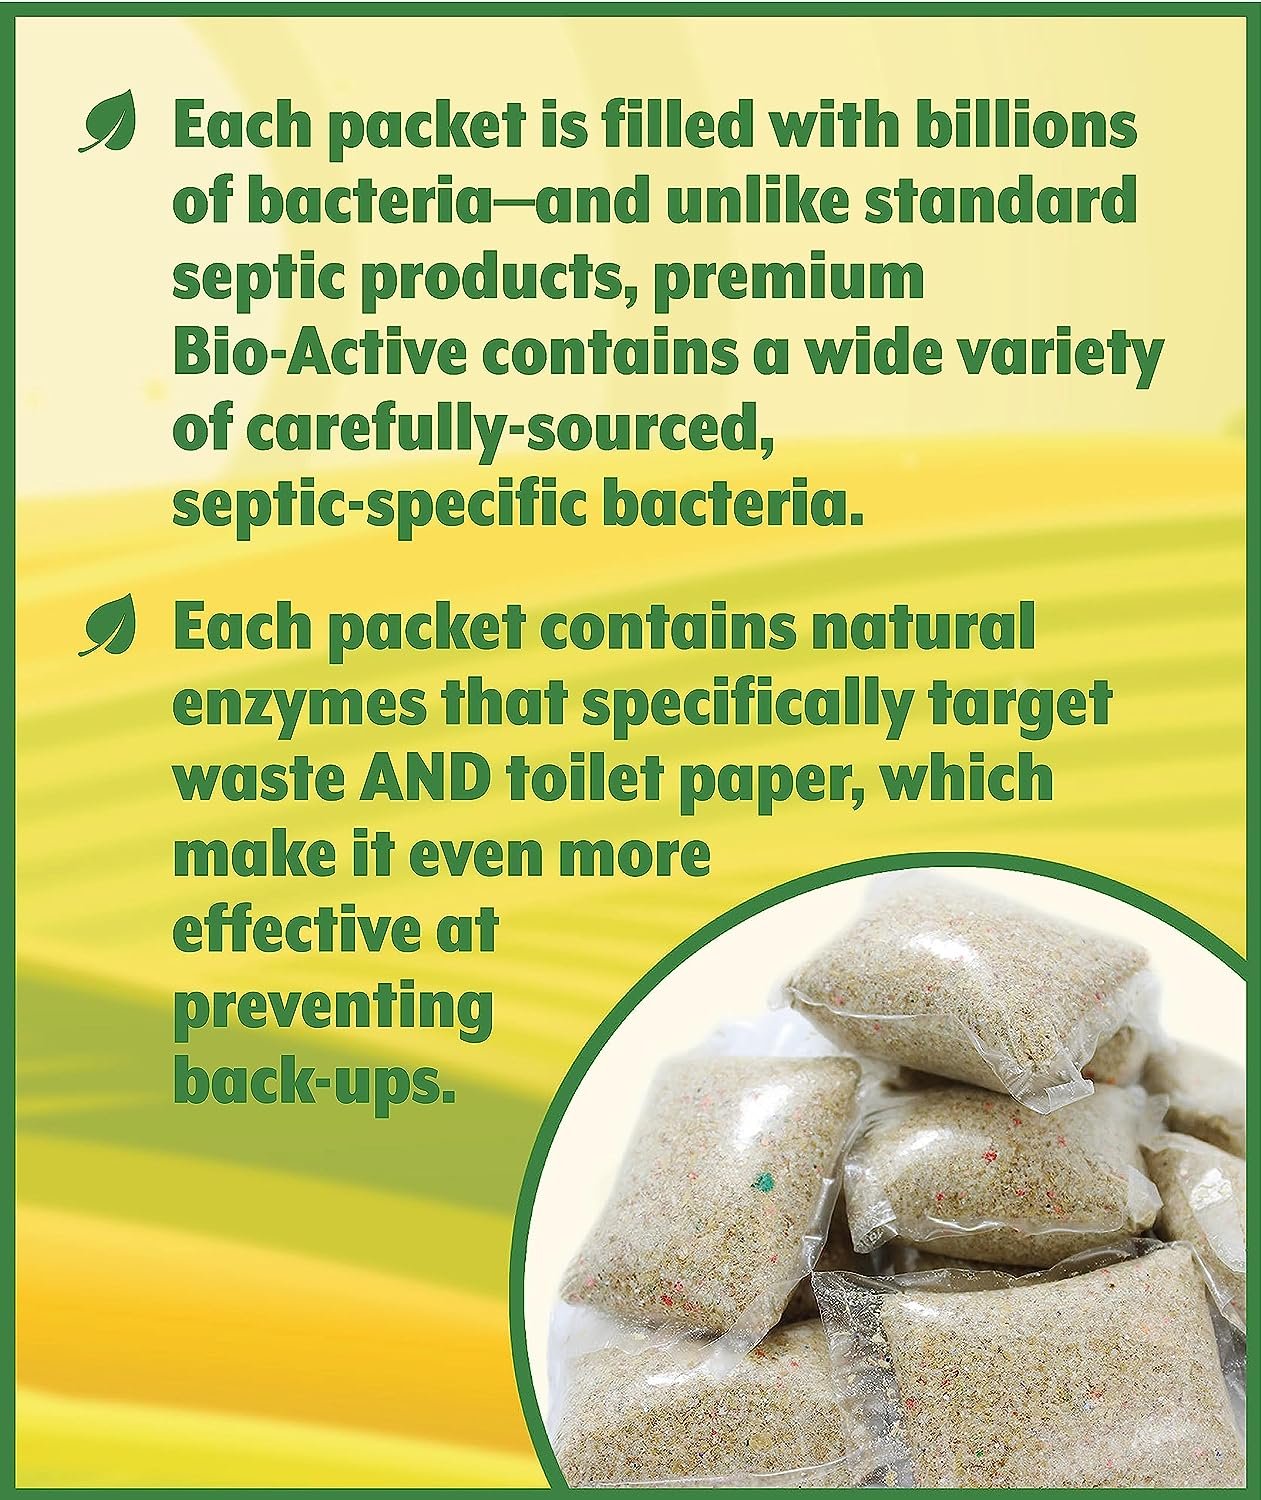 Bio-Active PREMIUM Septic Tank Treatment - 1 Year Supply of Beneficial Bacteria/Enzymes - 12 Treatments - Rapid Dissolve Sachet - Commercial Strength - Made in the USA